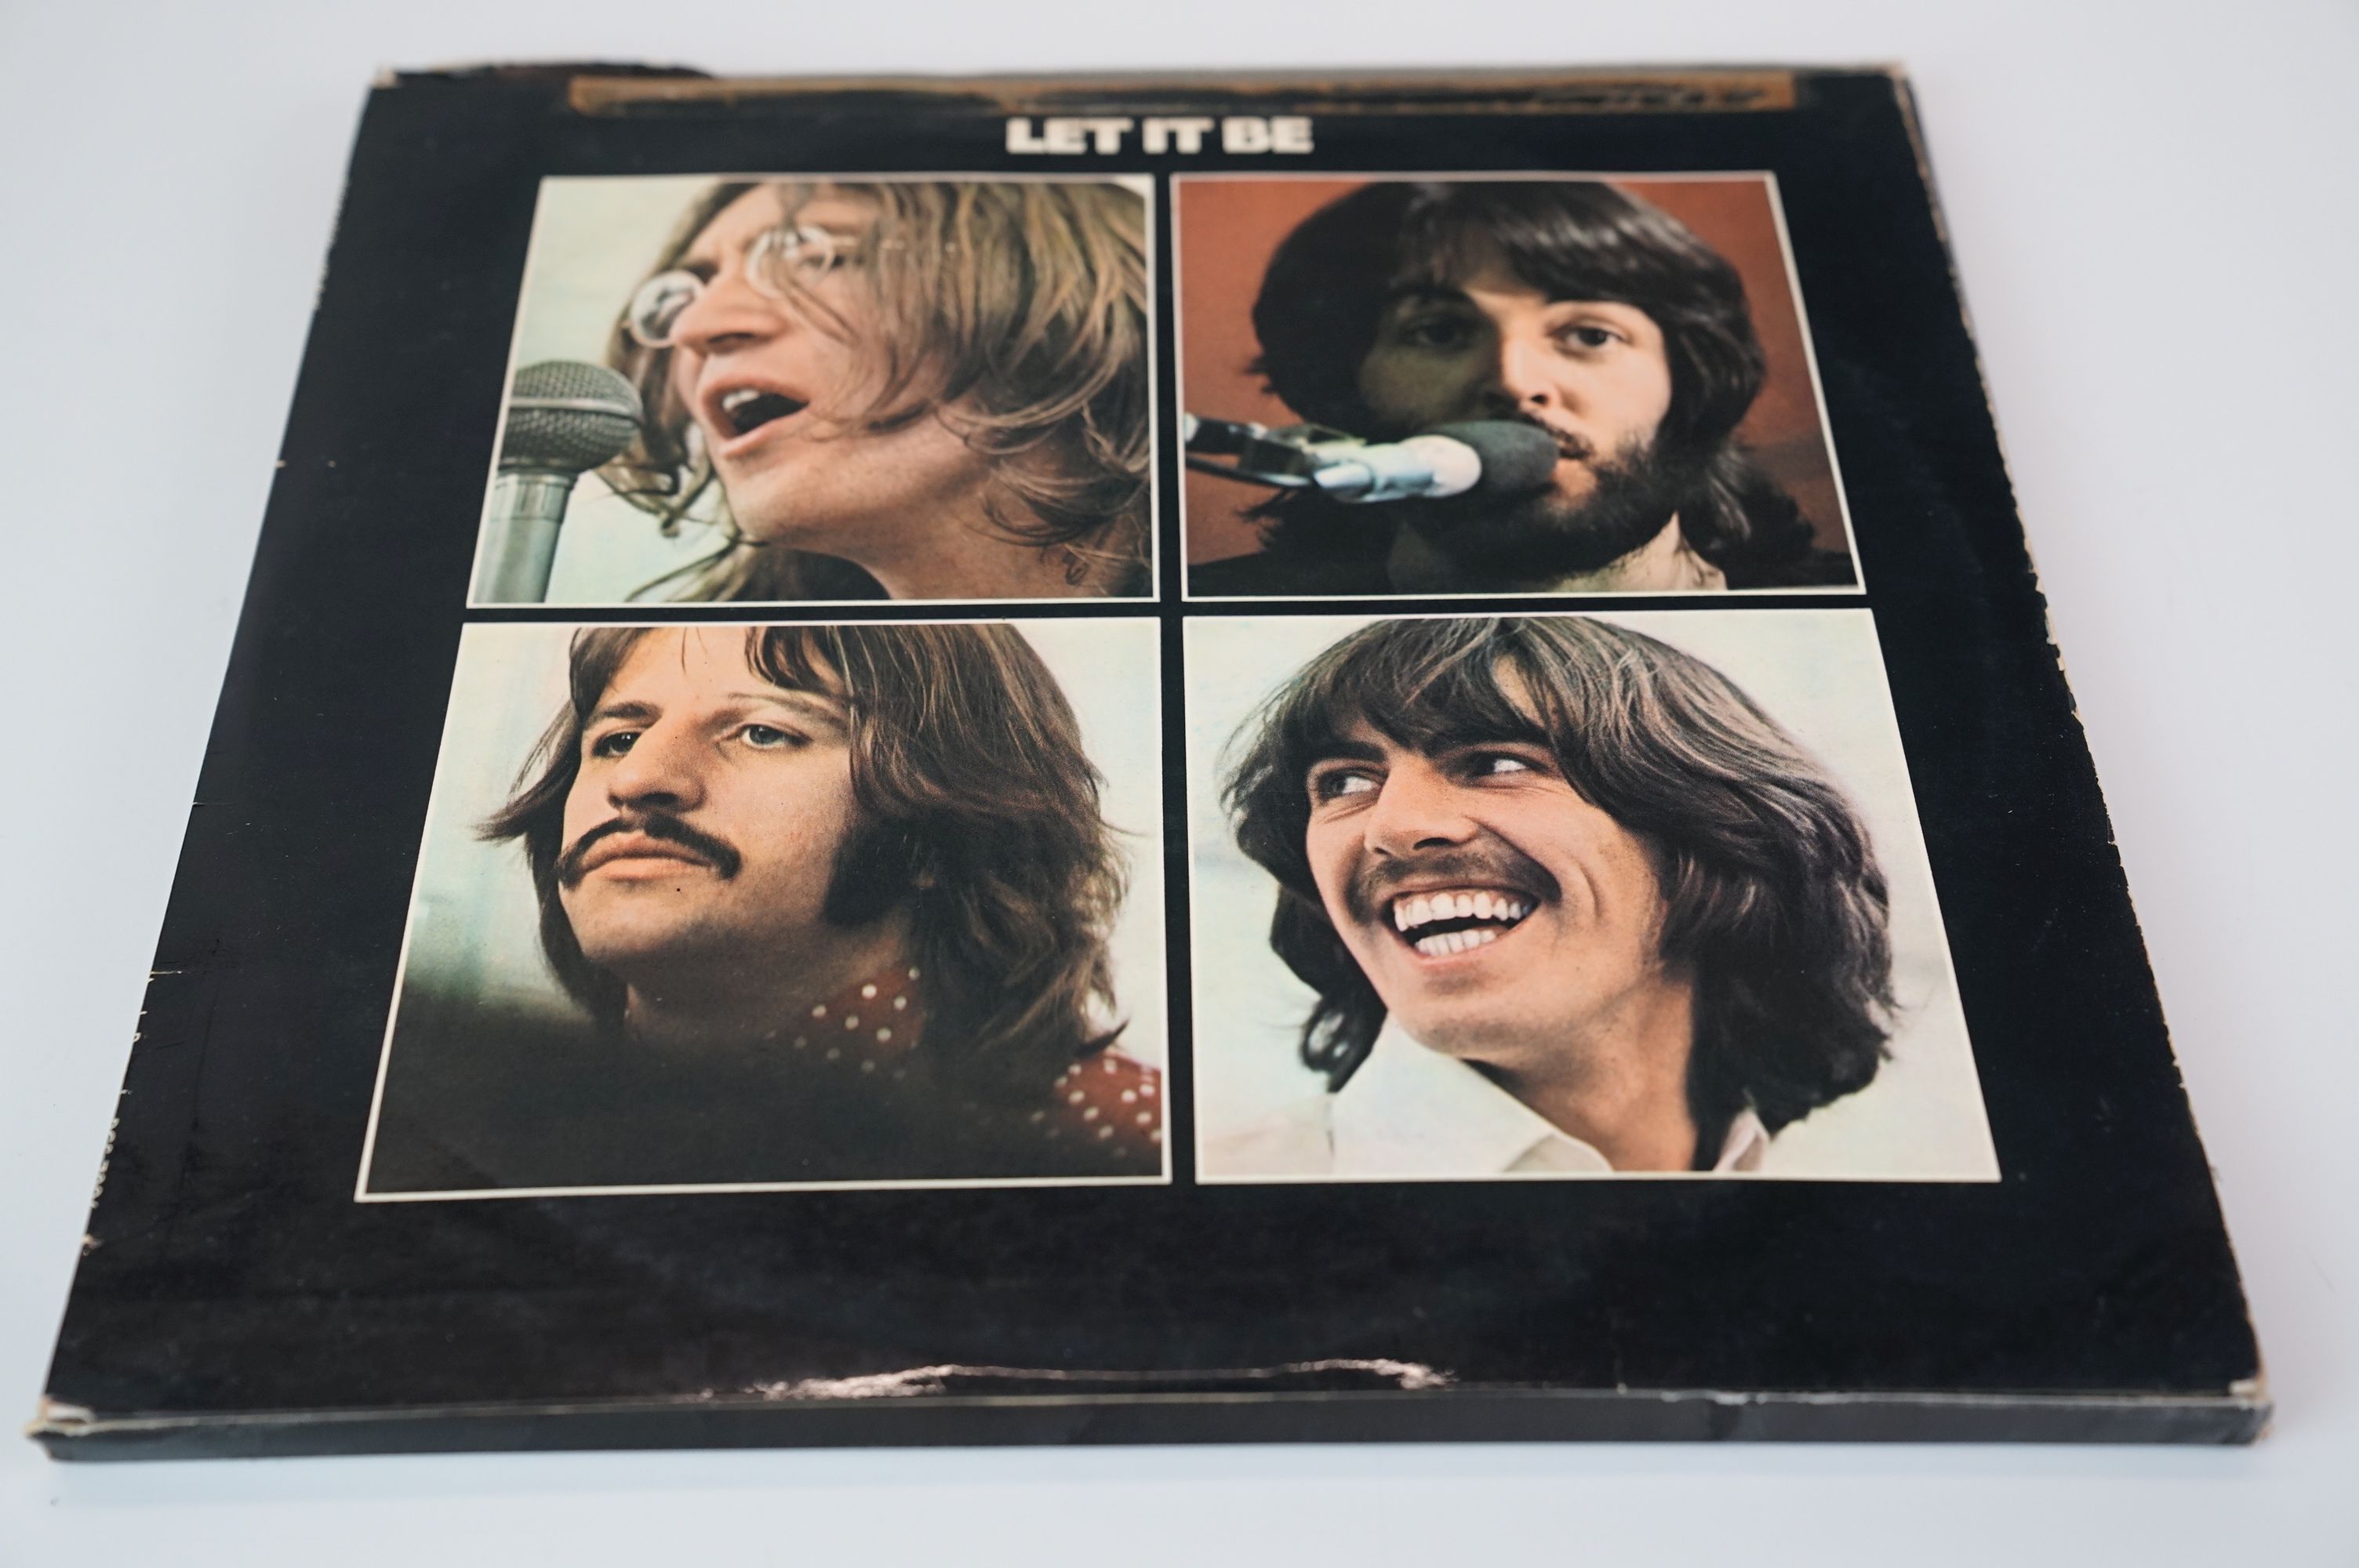 Vinyl - The Beatles Let It Be Box set with record and book, laminated cover, vg overall - Image 3 of 10